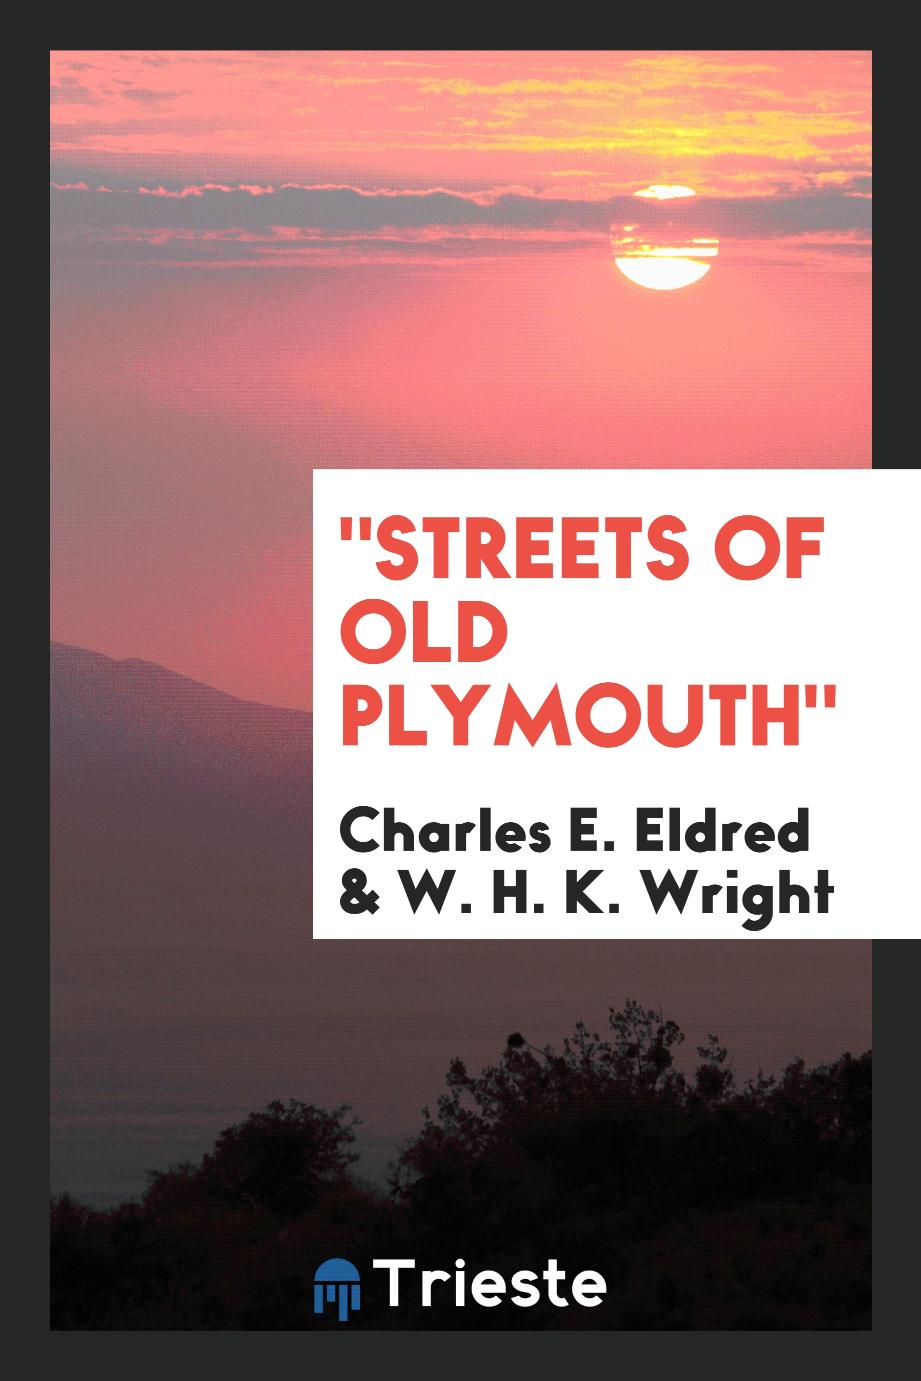 "Streets of Old Plymouth"